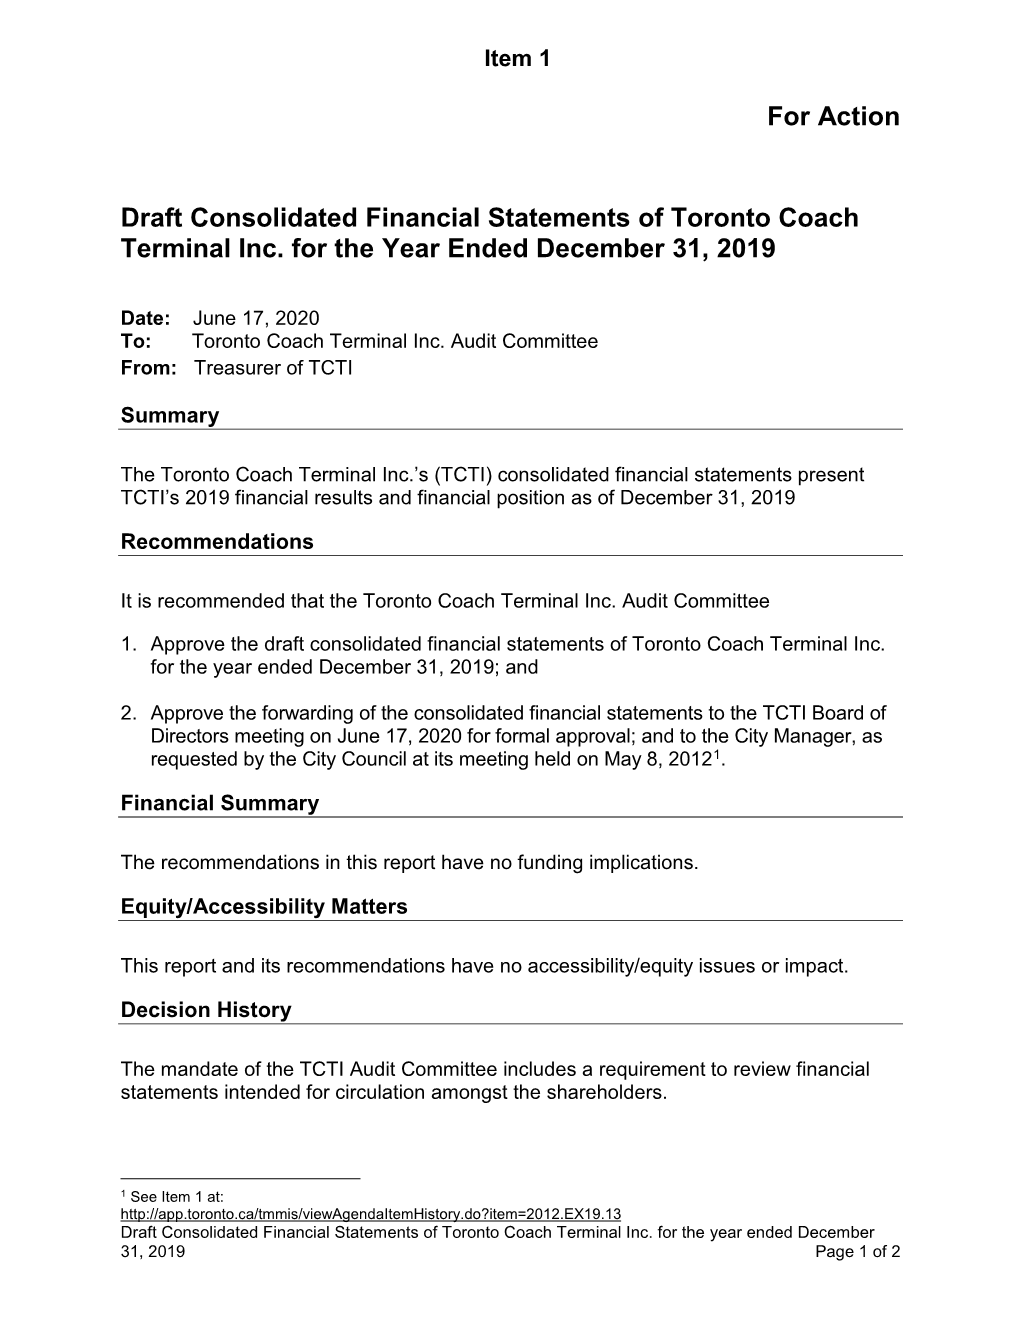 For Action Draft Consolidated Financial Statements of Toronto